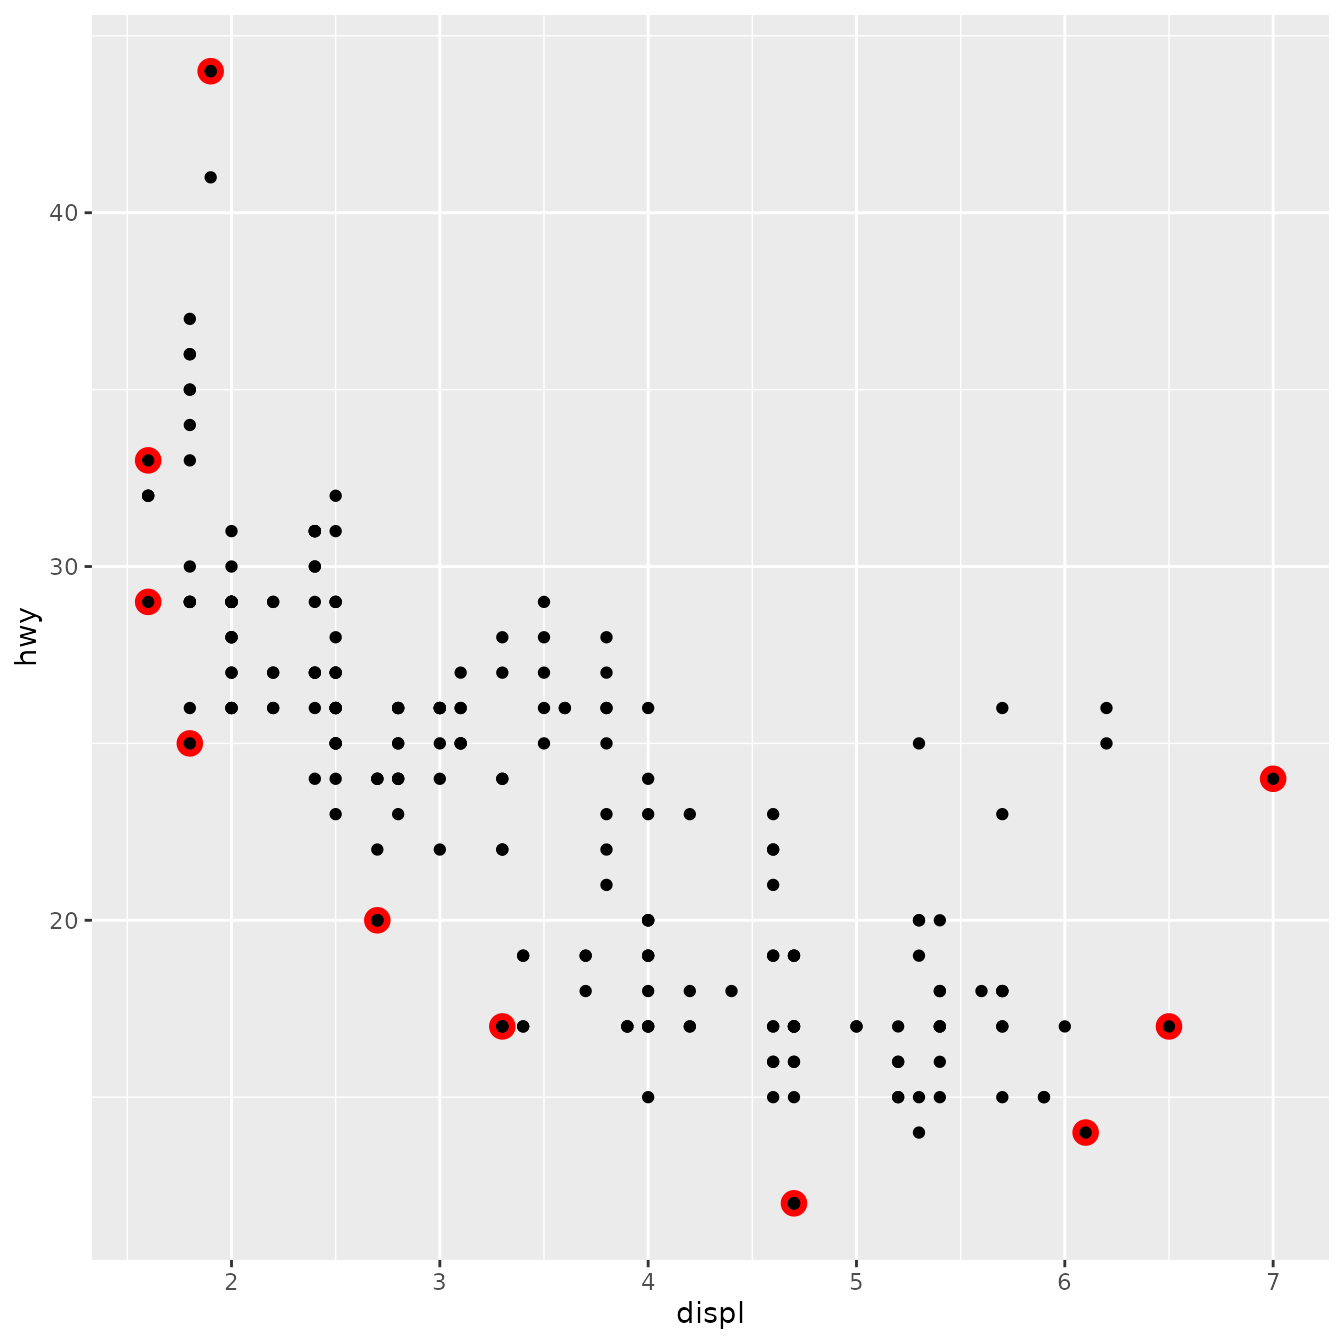 Scatterplot of engine displacement versus highway miles per gallon, for 234 cars. The points that are part of the convex hull of all points are marked with a red outline.